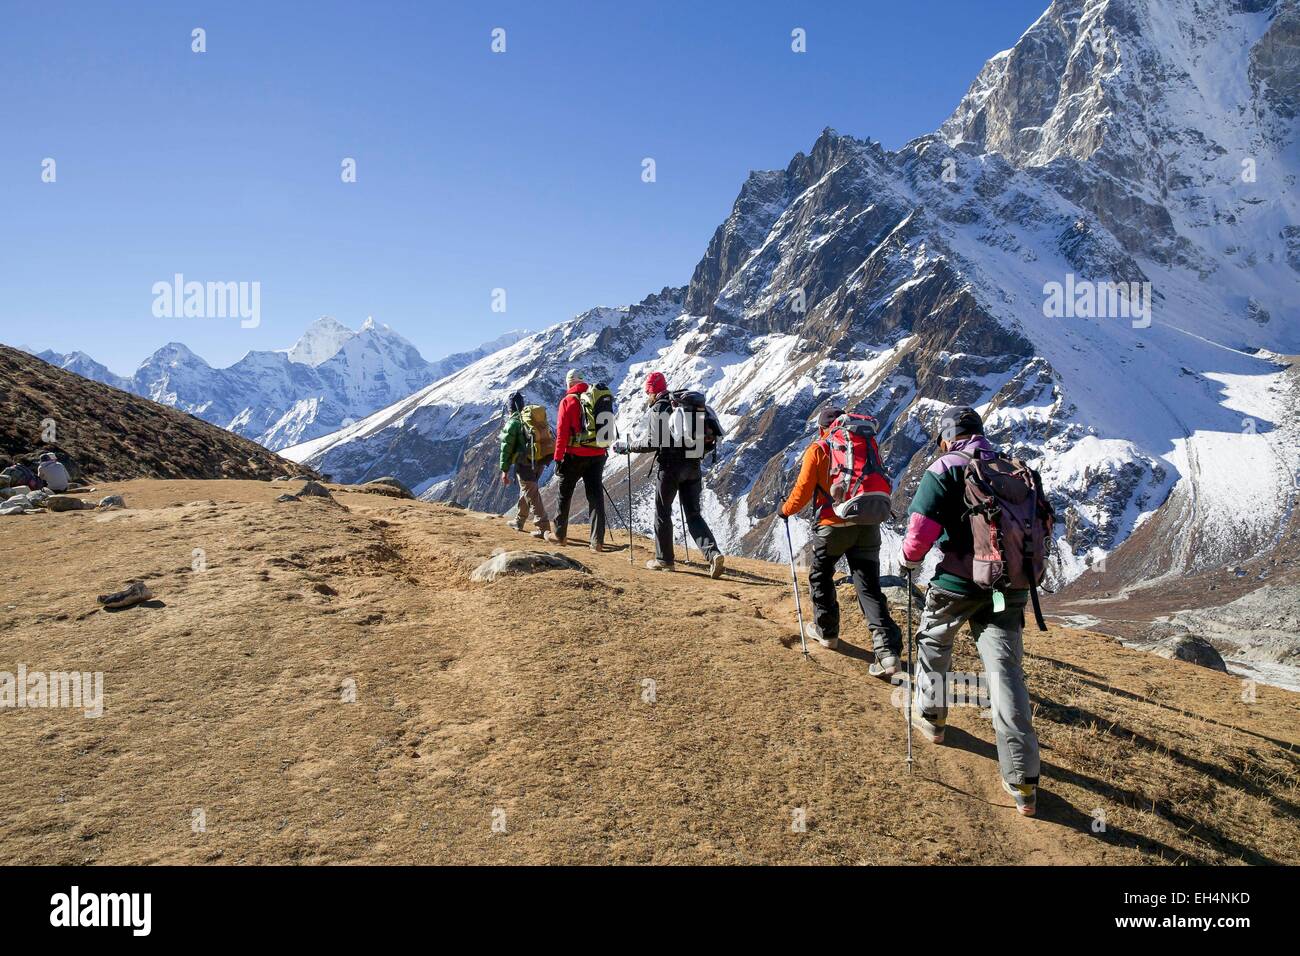 Nepal, Sagarmatha National Park, listed as World Heritage by UNESCO, Solu Khumbu District, hikers on the way to Everest Base Camp Stock Photo